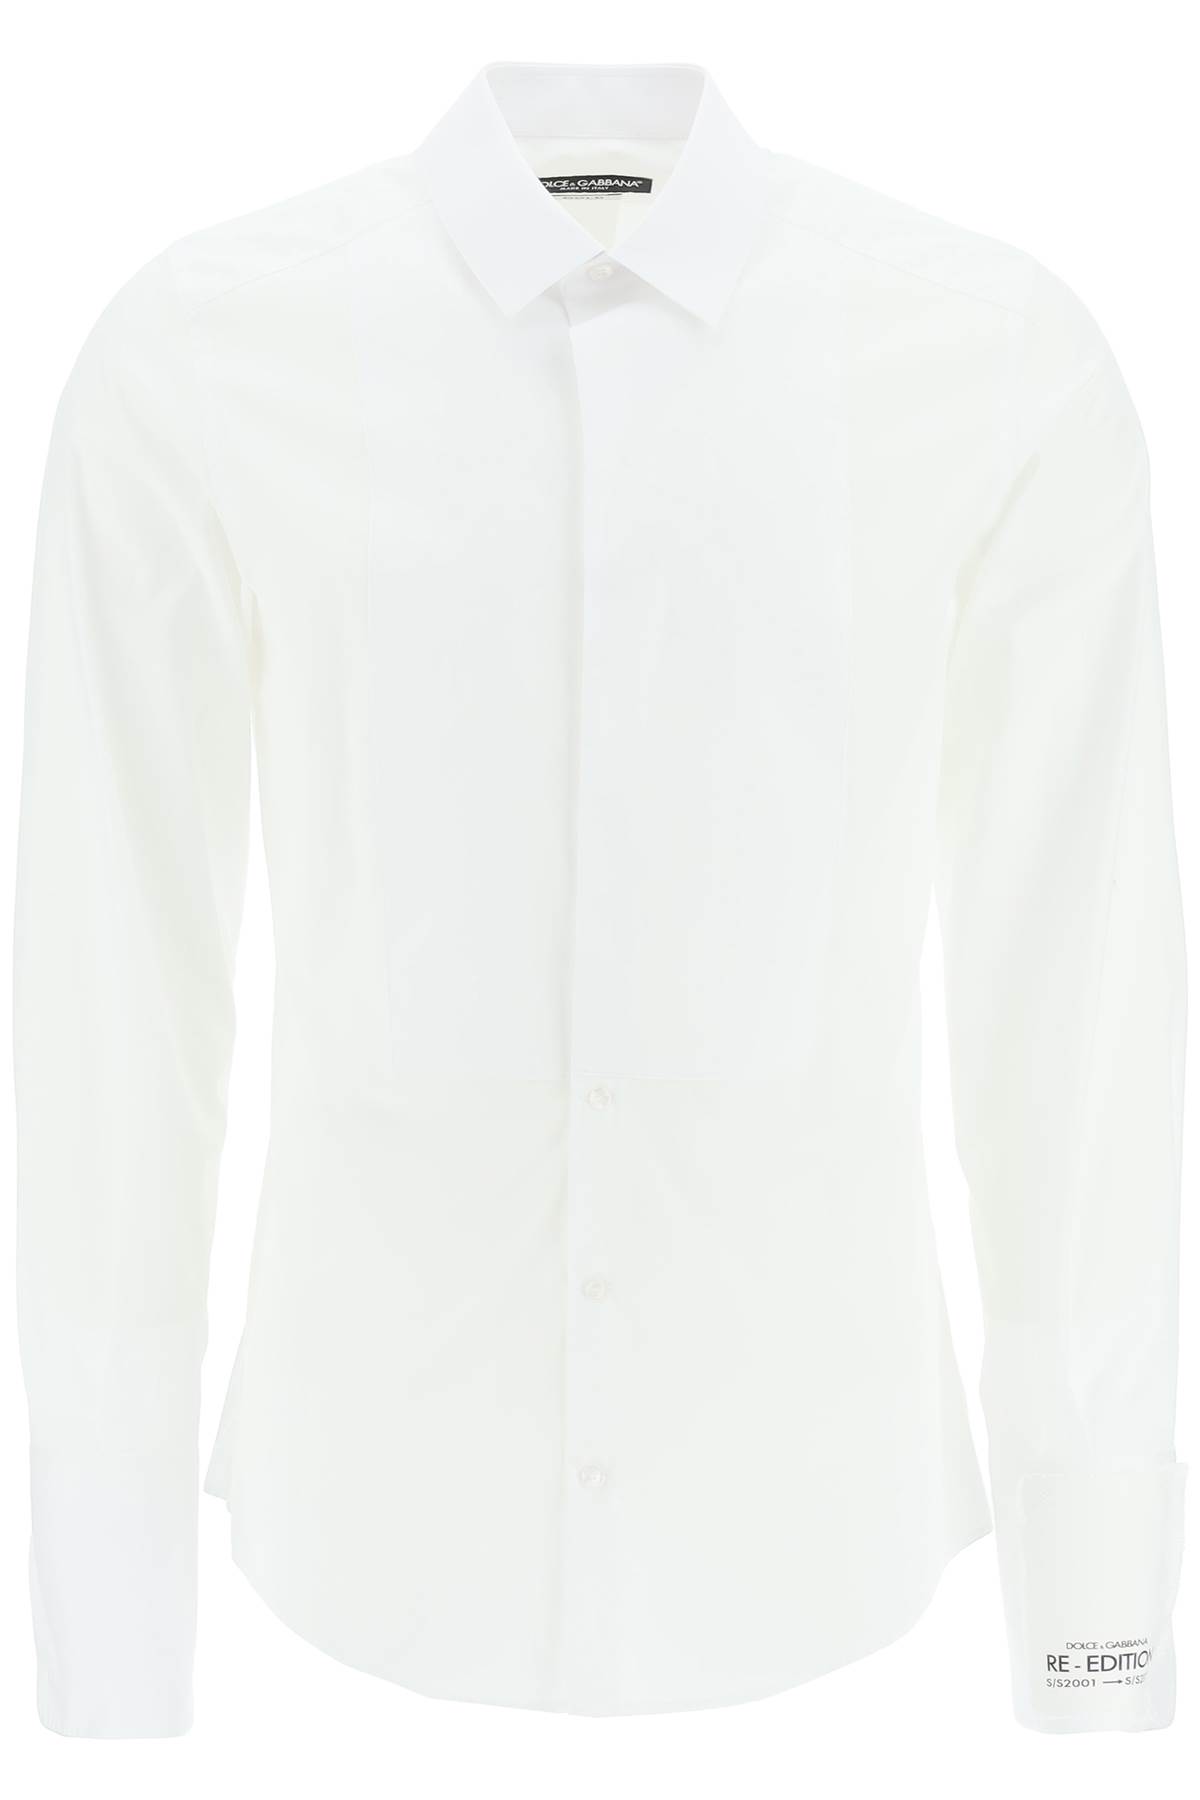 Dolce & Gabbana Re-edition Gold-fit Tuxedo Shirt In White